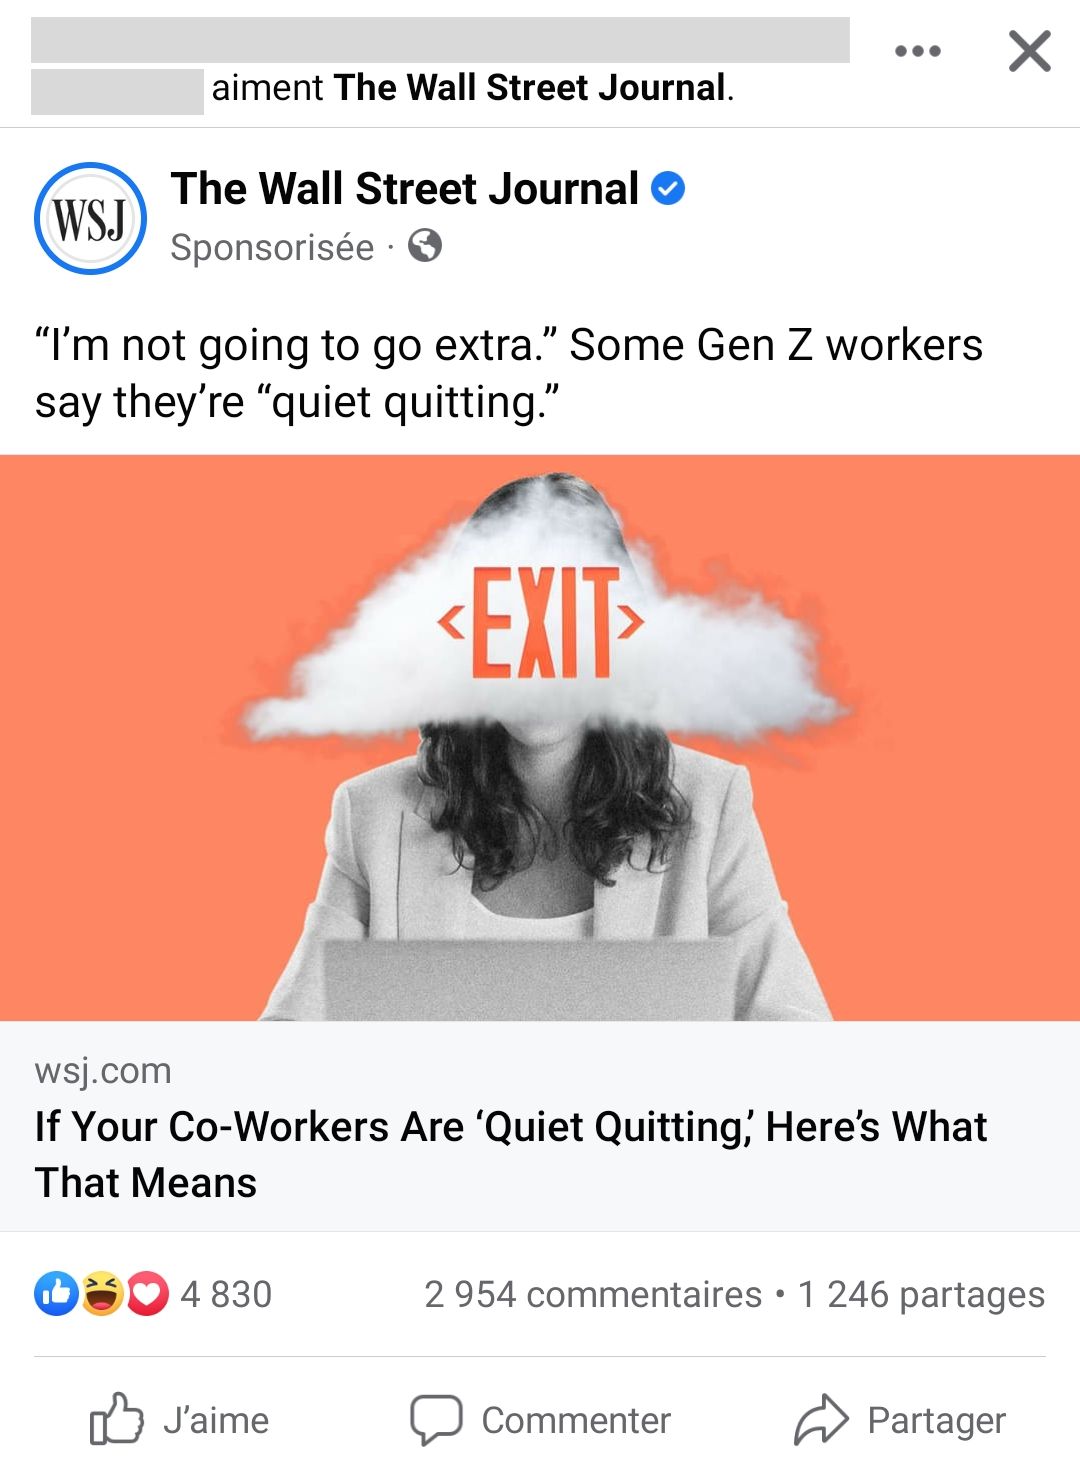 Article from the Wall Street journal: If your Co-Workers are 'Quiet Quitting', Here's What That means